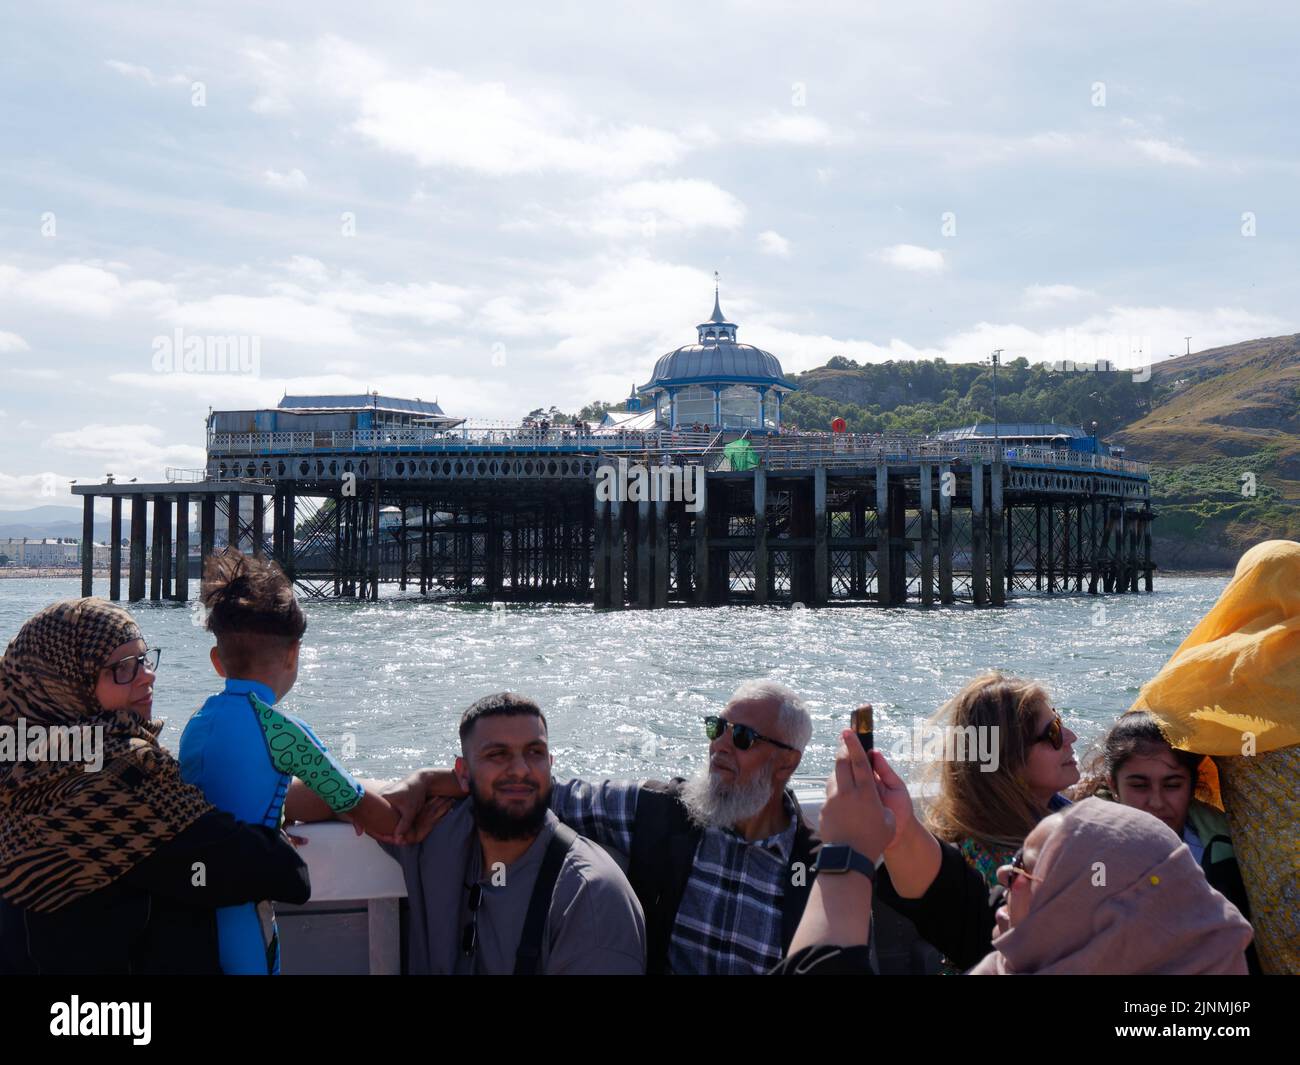 Llandudno, Clwyd, Wales, August 07 2022: People enjoying a boat trip with the pier in the background. Stock Photo